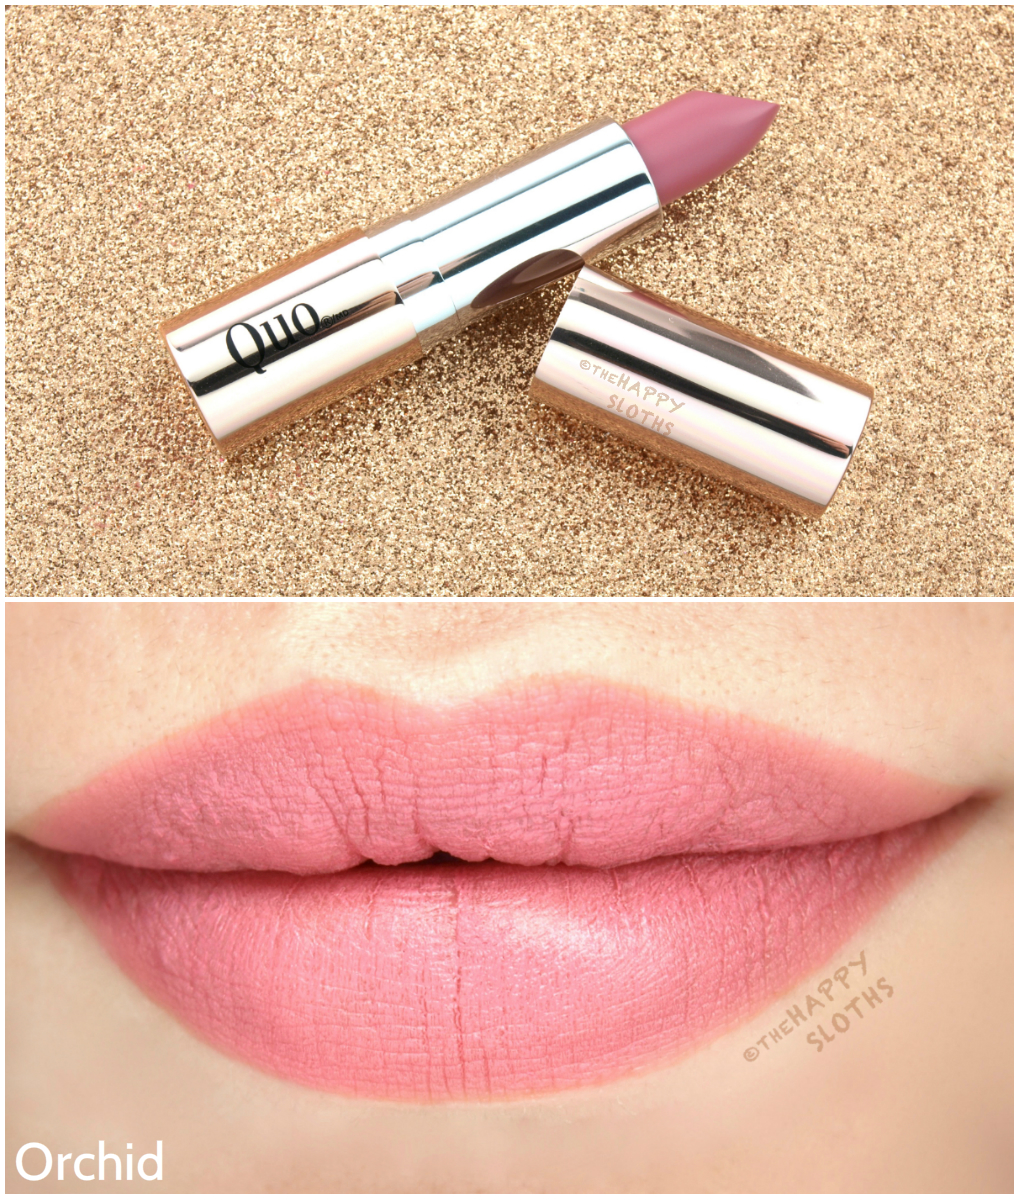 Quo Luxury Lipstick Wardrobe Review and Swatches